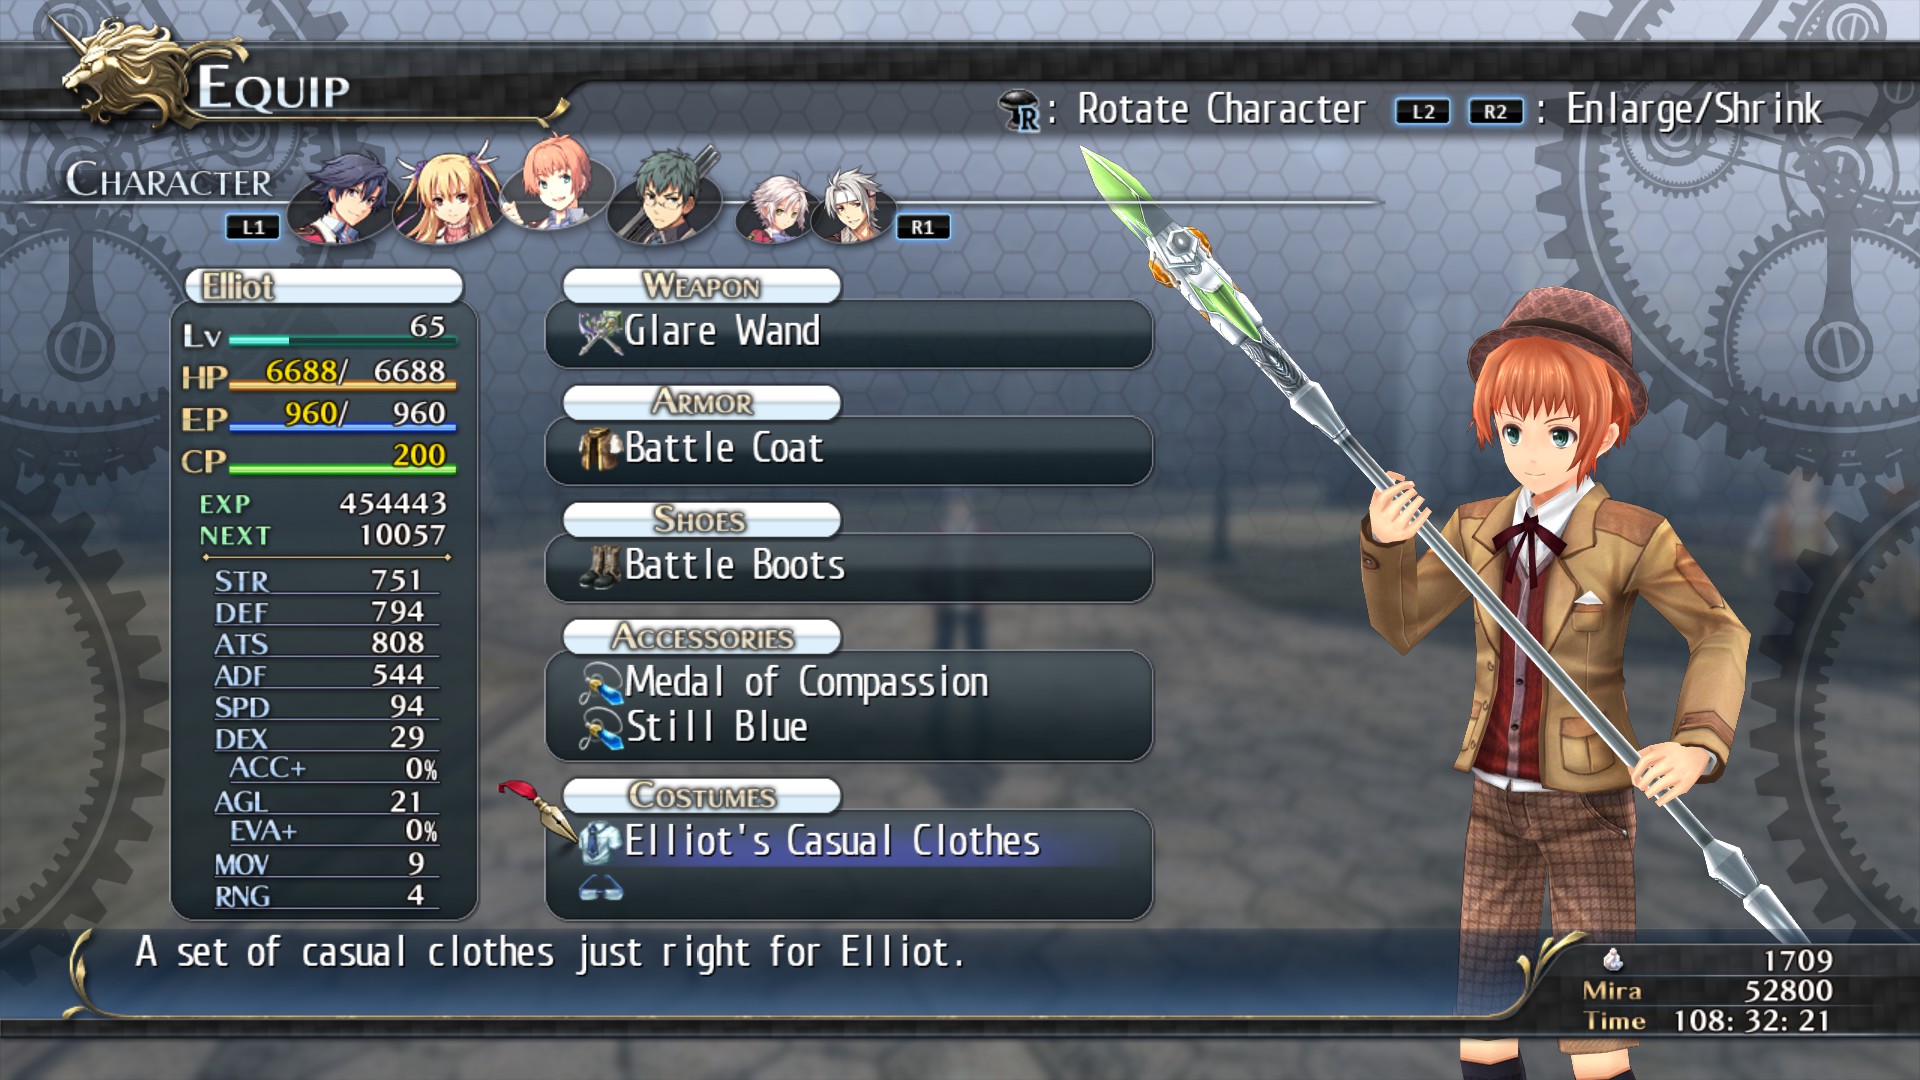 The Legend of Heroes: Trails of Cold Steel - Elliot's Casuals Featured Screenshot #1